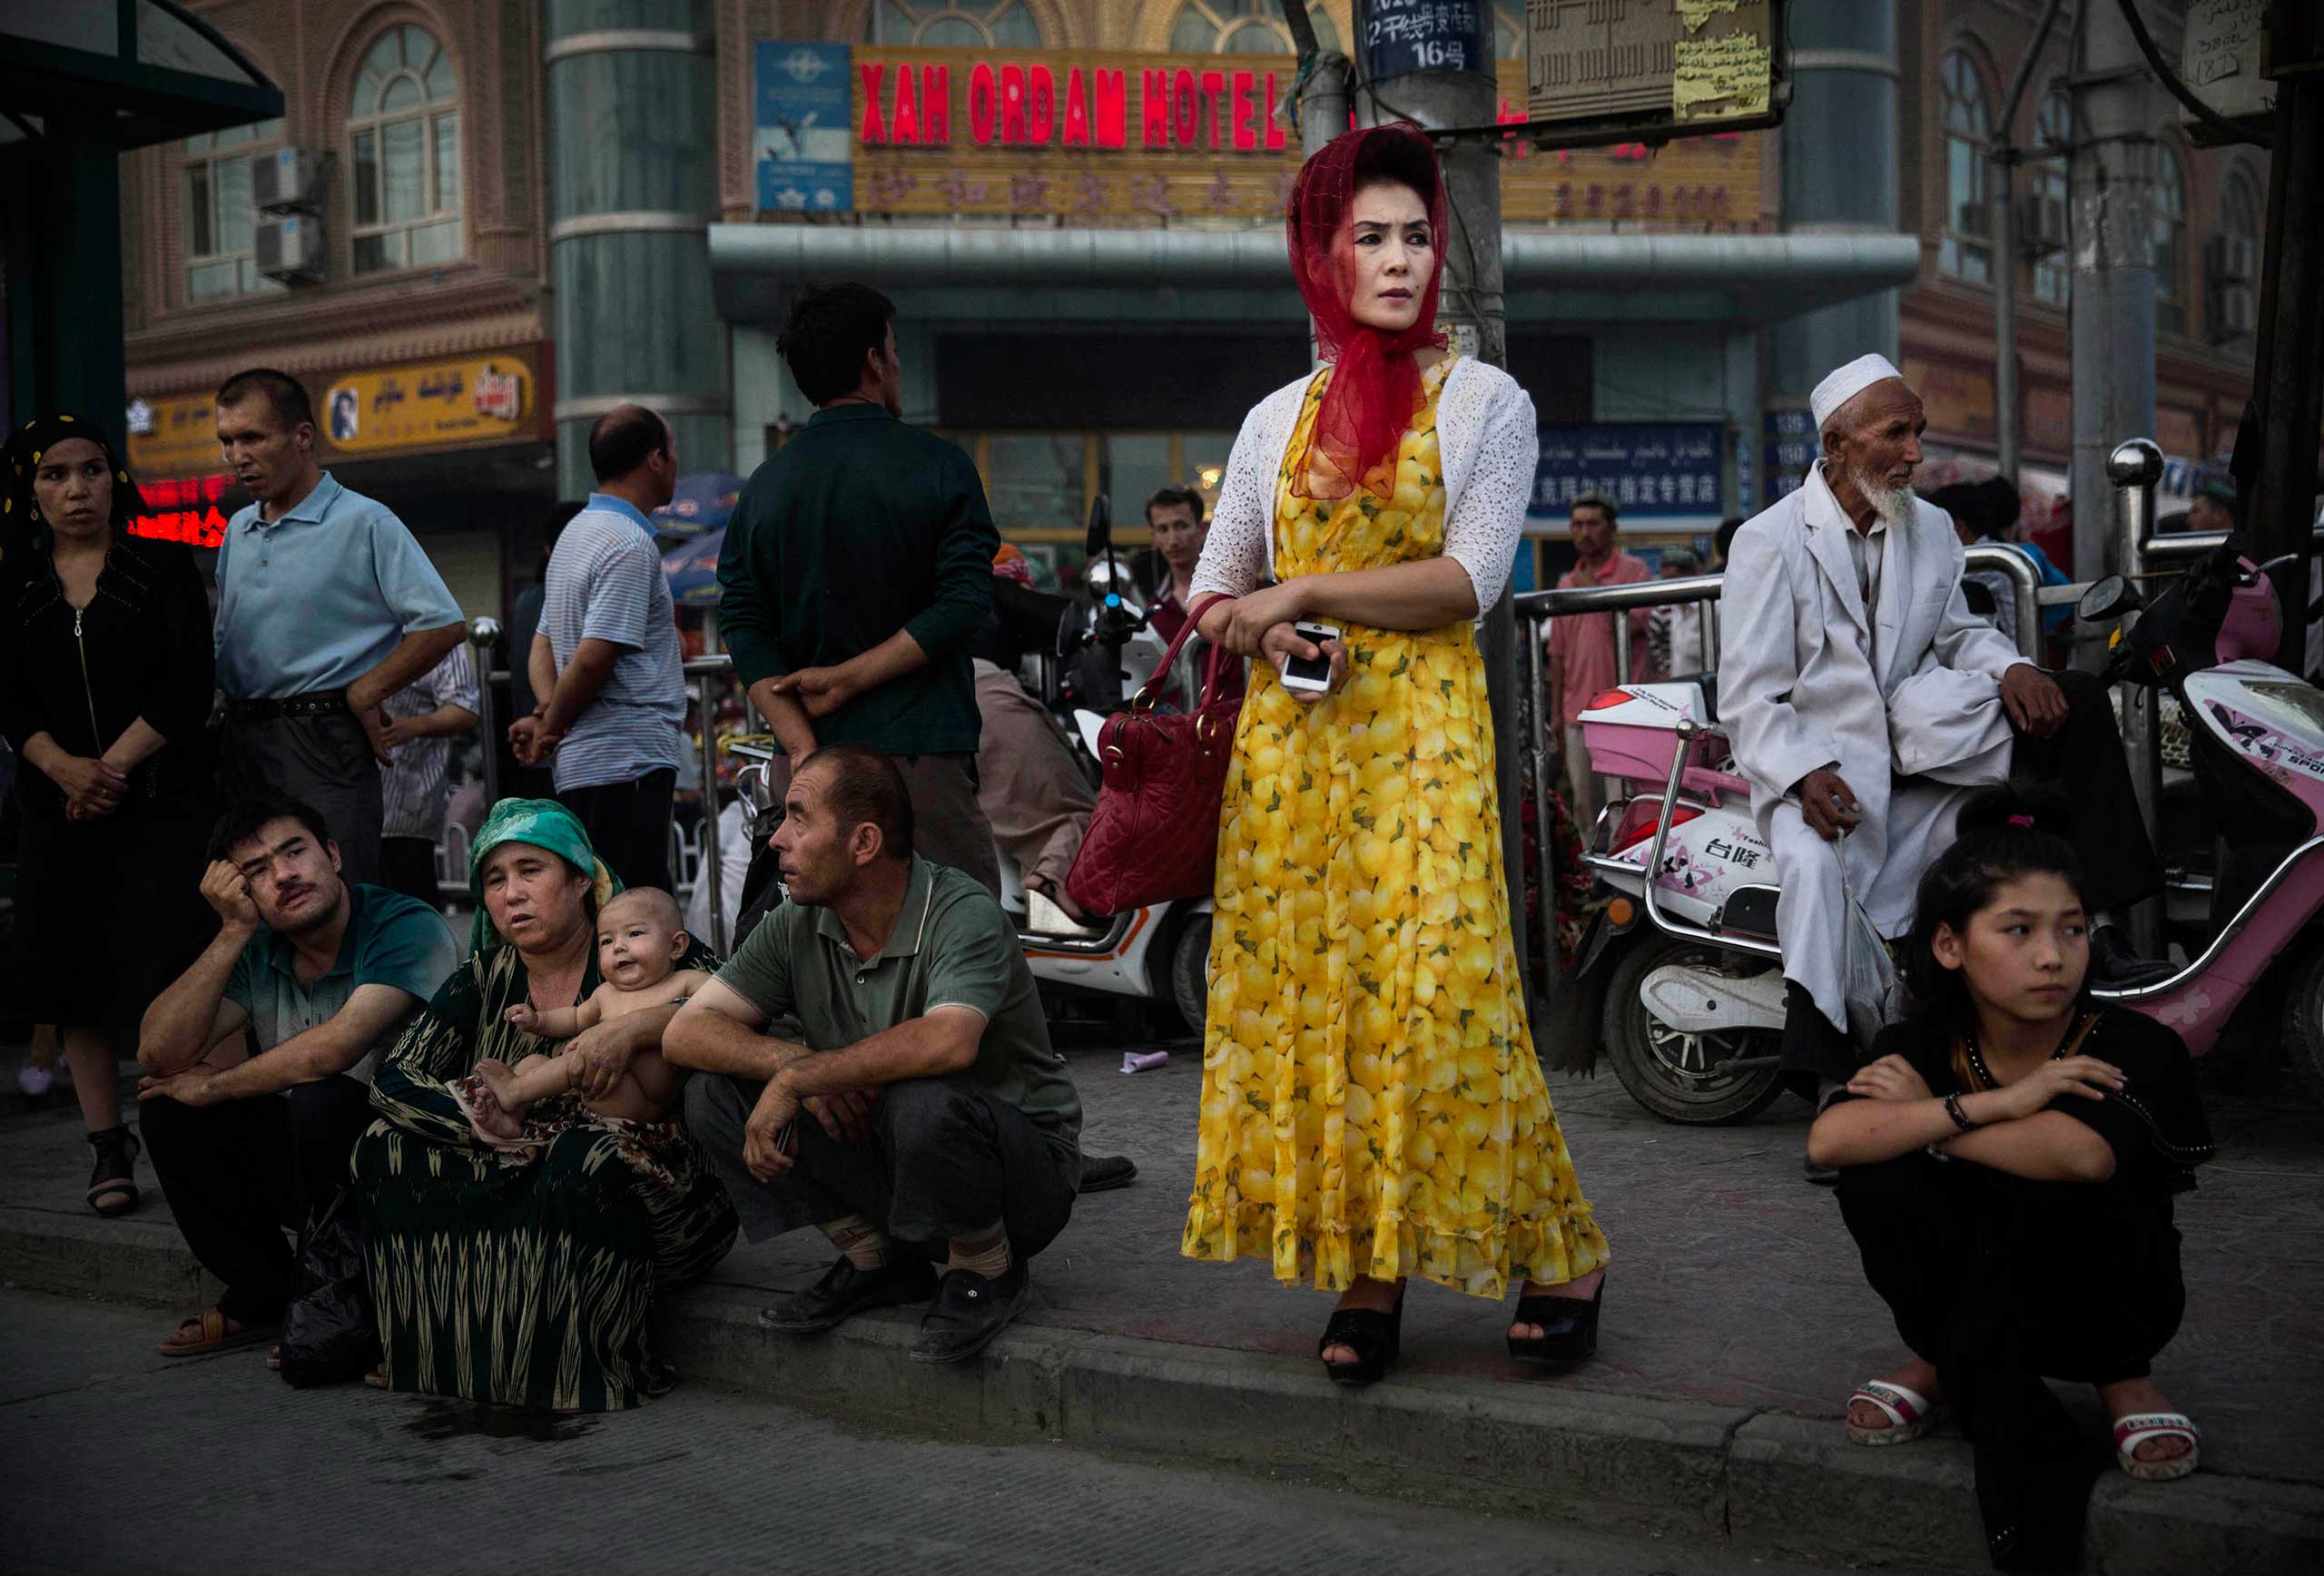 From the series: Uighur Life Persists in Kashgar Amid Growing Tension in Restive Xinjiang ProvinceUighurs wait at a bus stop  in old Kashgar, Xinjiang Province, China, July 27, 2014.